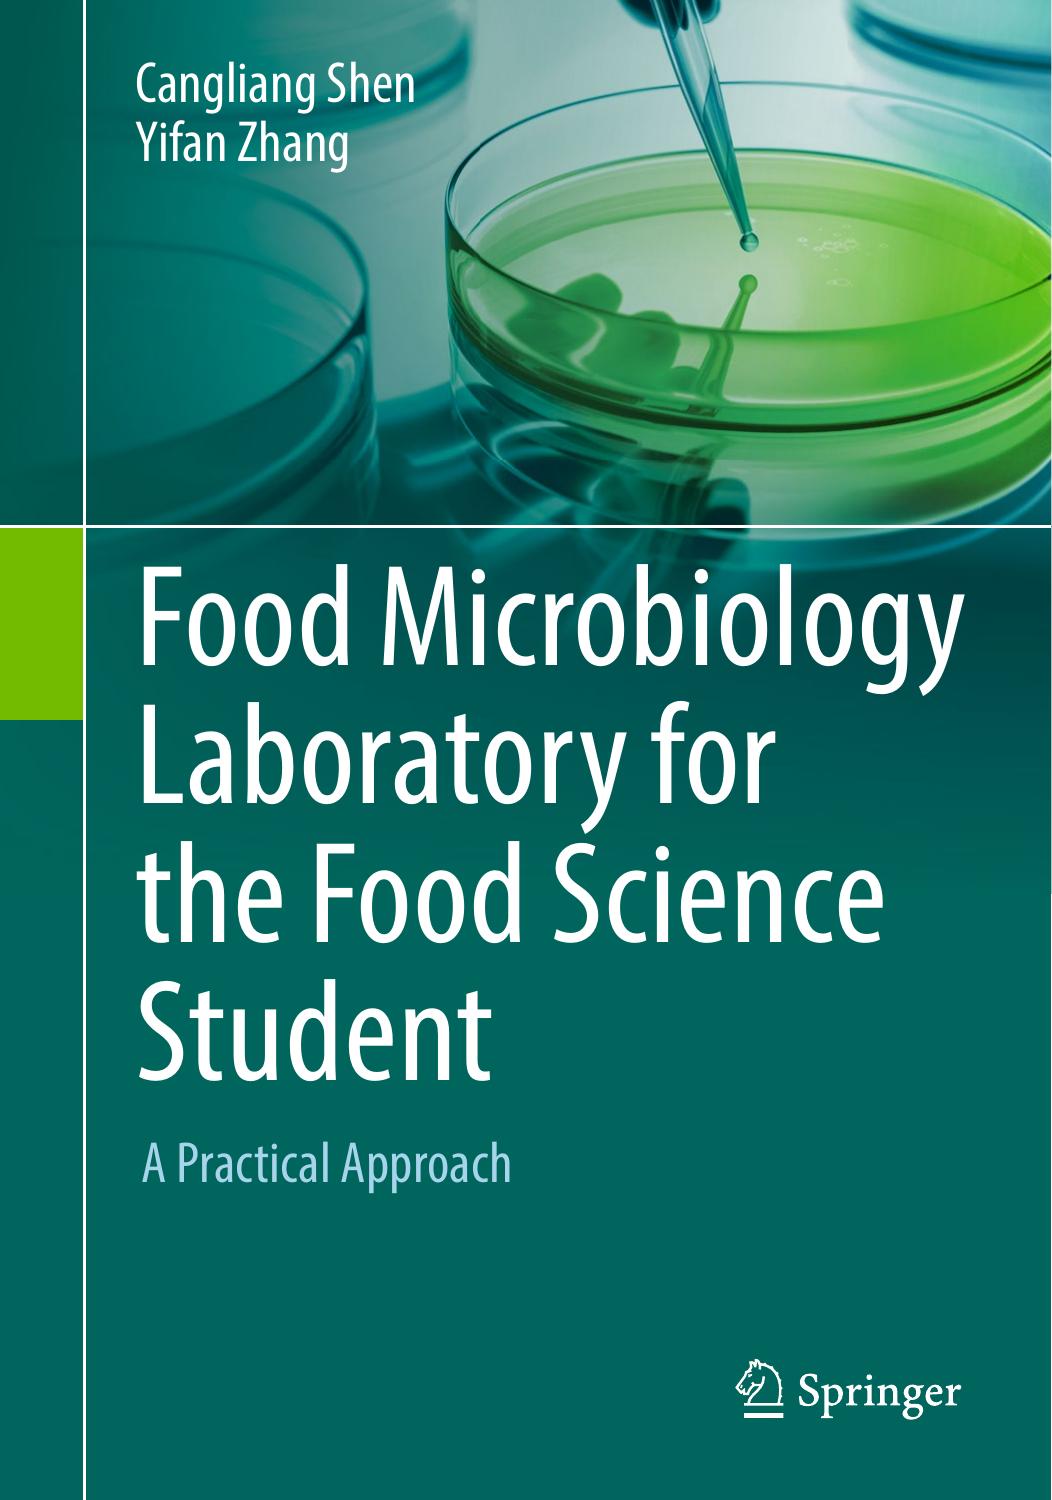 Food microbiology laboratory for the food science student  a practical approach 2017